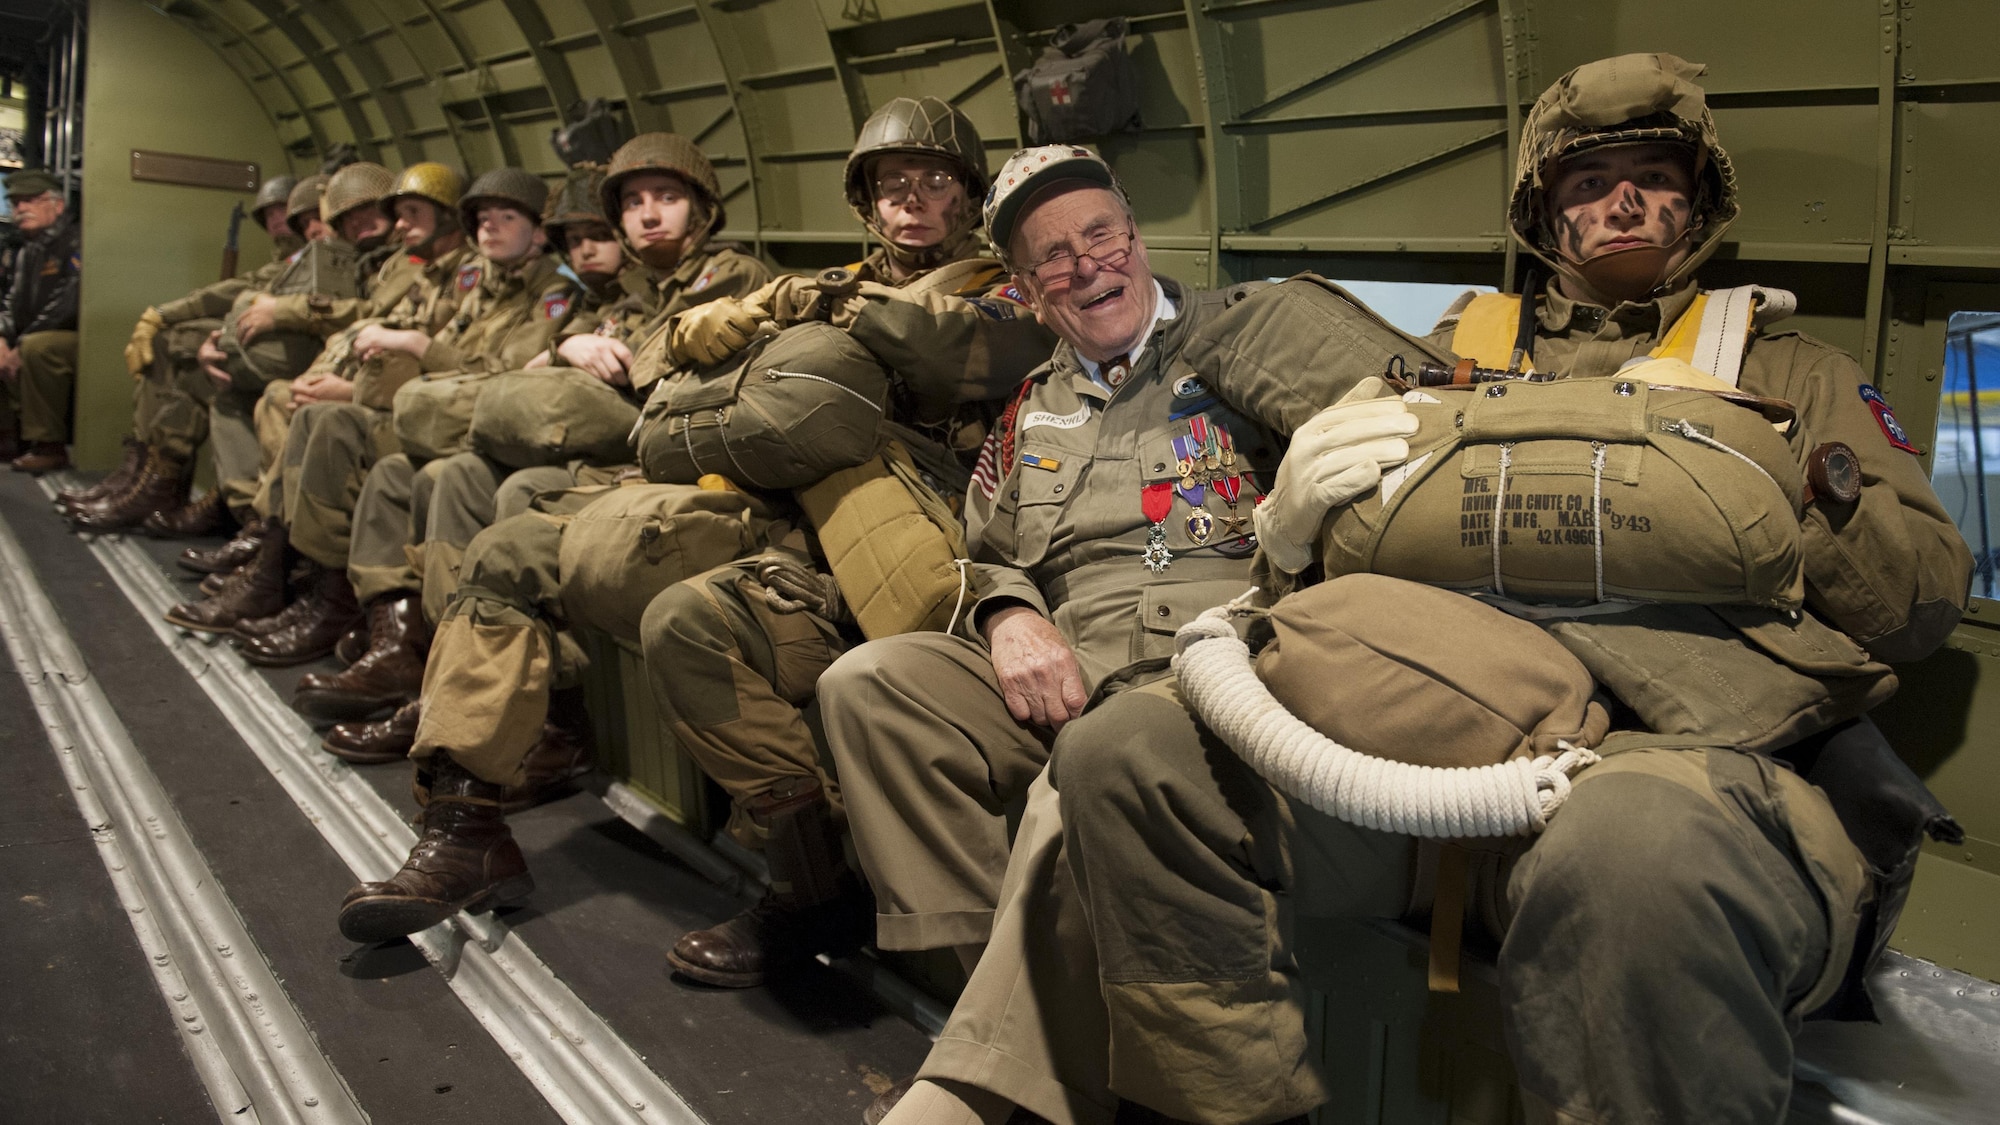 George Shenkle (second from right) sits with reenactors depicting World War II-era paratroopers from the 82nd Airborne Division inside a C-47A Skytrain April 18, 2015, at the Air Mobility Command Museum near Dover Air Force Base, Del. Shenkle is sitting in the same seat position on the very aircraft that he jumped out of on D-Day, June 6, 1944, over Normandy, France. (U.S. Air Force photo/Airman 1st Class Zachary Cacicia)